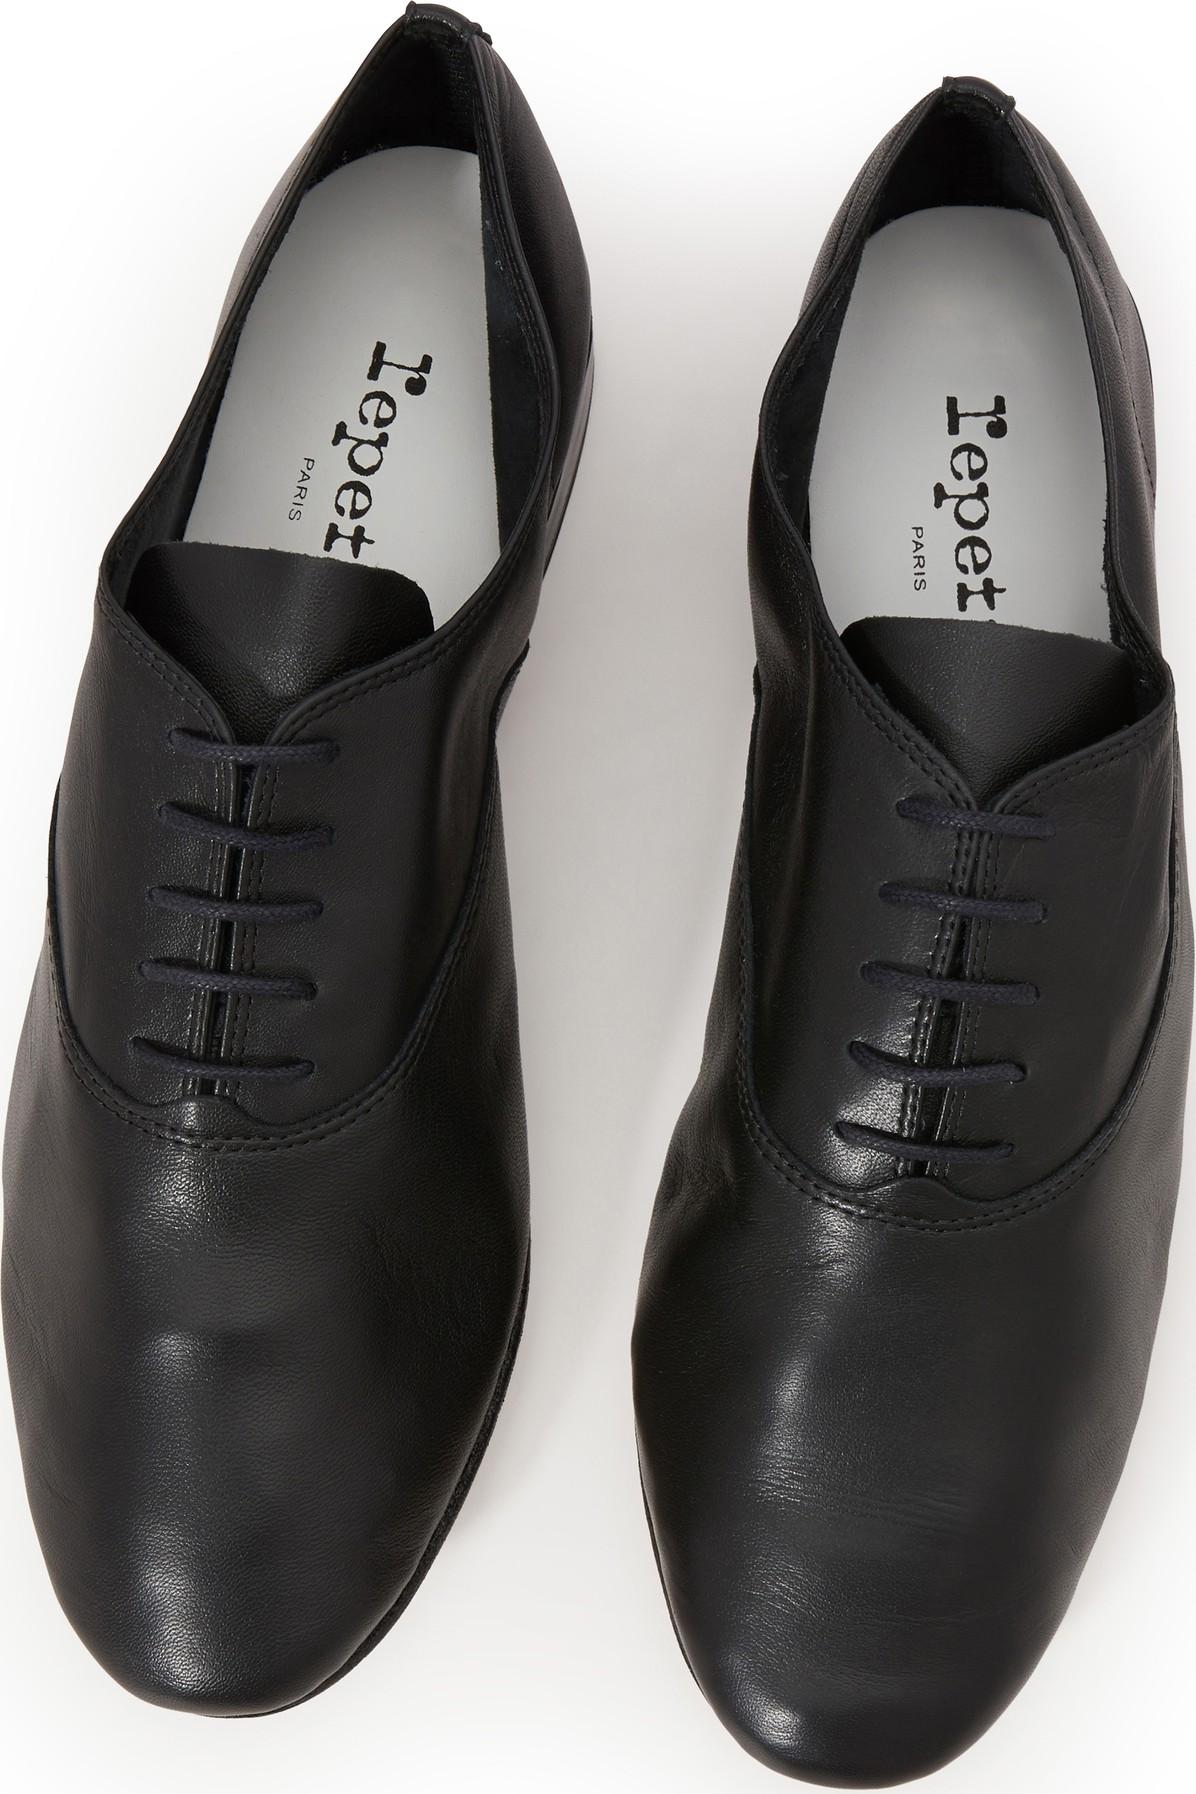 Repetto Leather Zizi Loafers in Black - Lyst